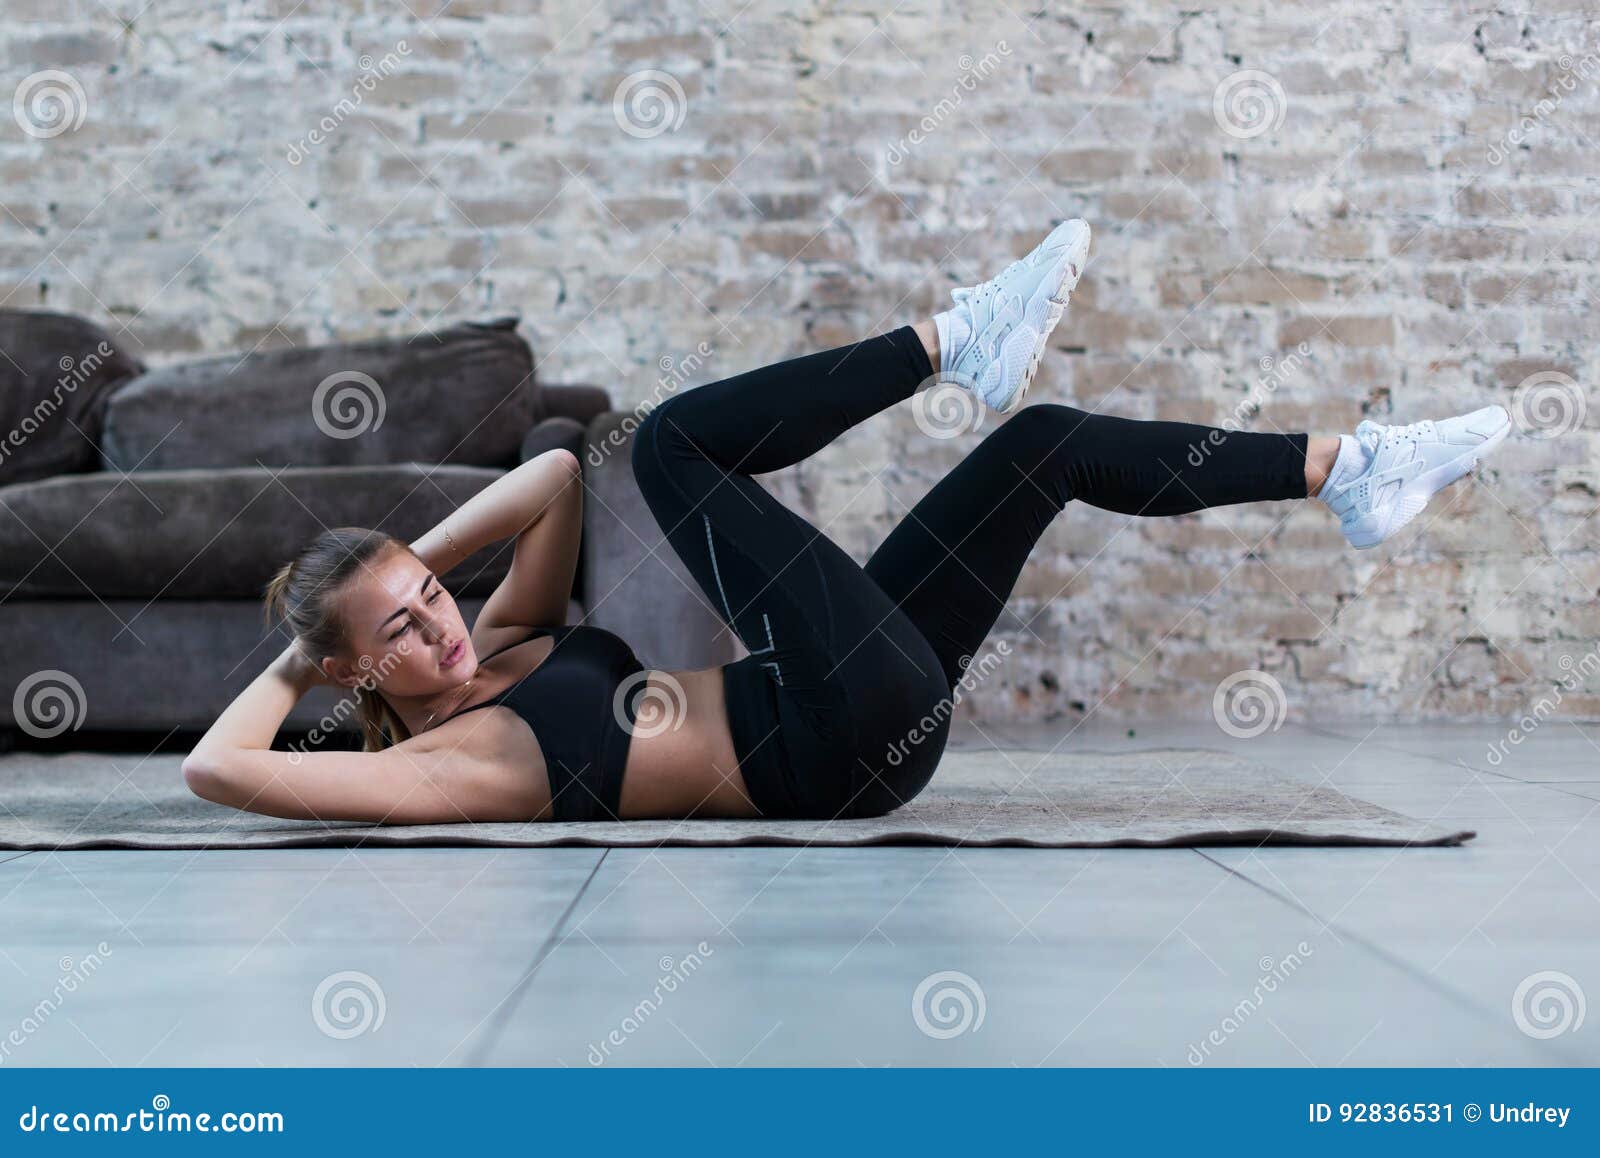 sportive young lady doing crisscross crunch exercise lying on a rug at modern studio